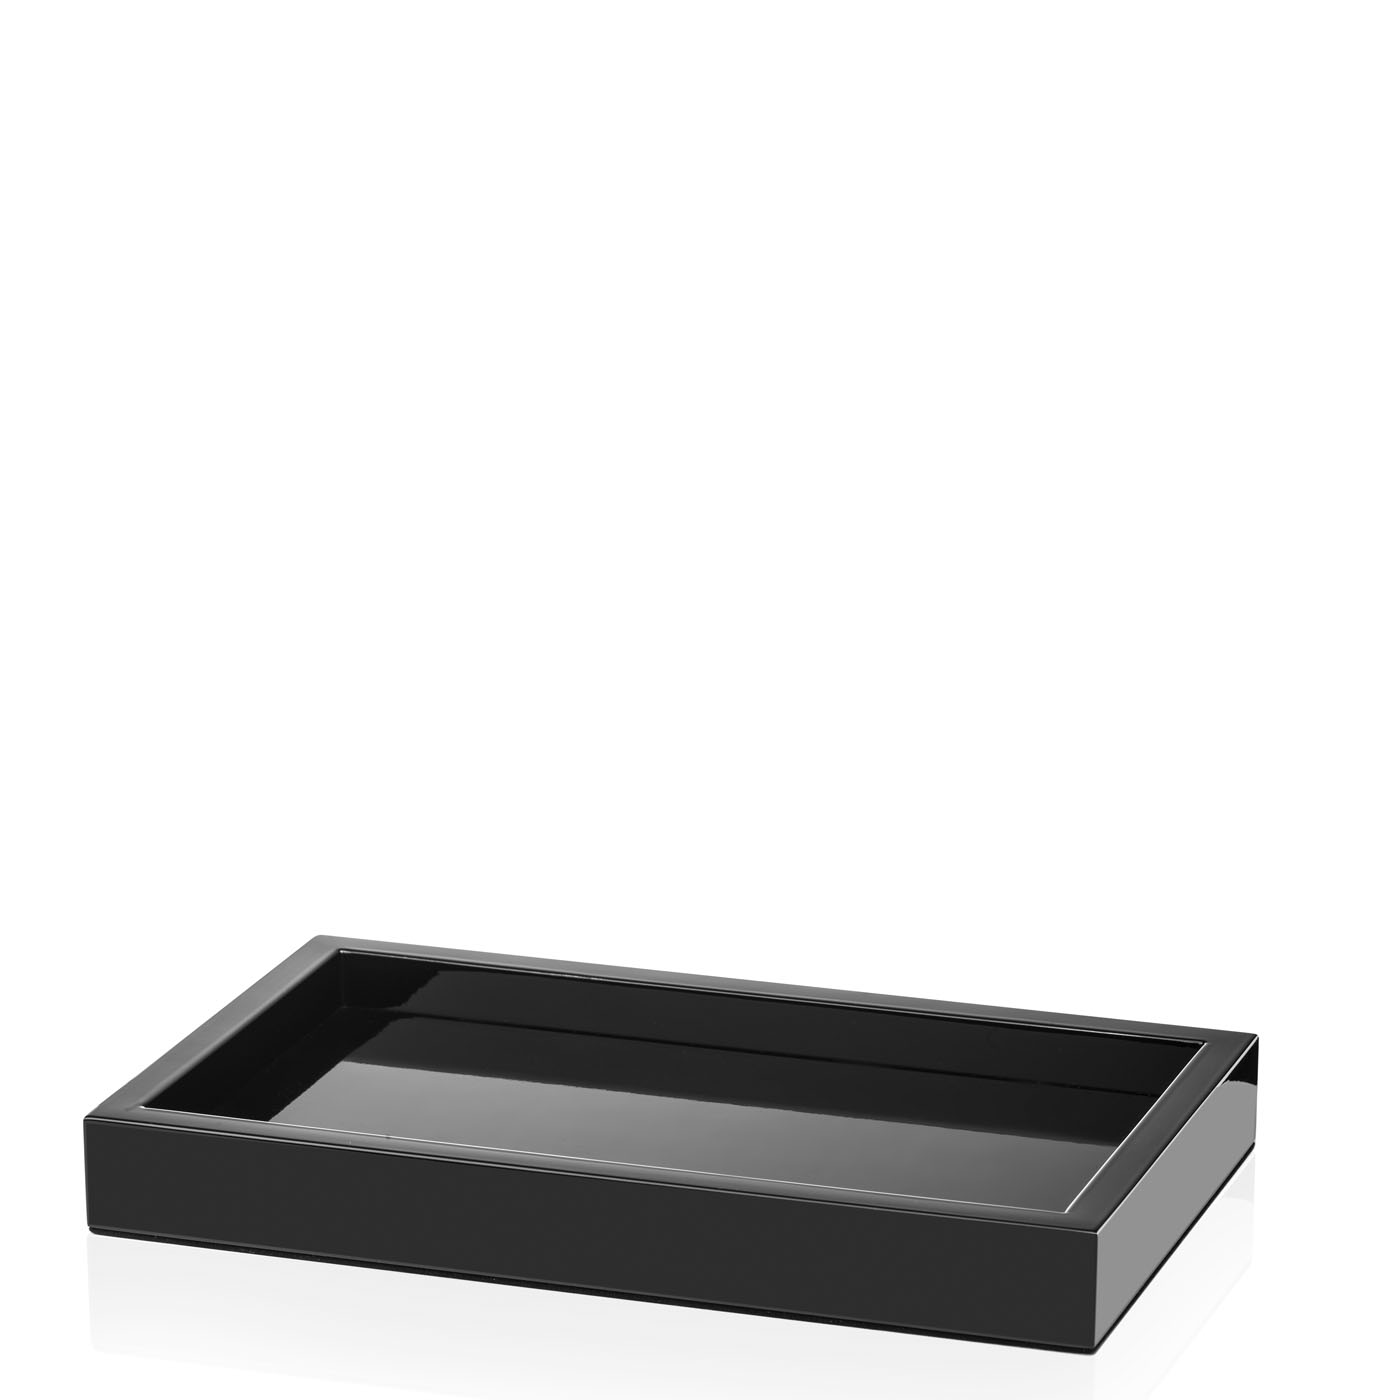 Bath sets - Iris tray in horn and glossy black lacquered wood 1953 - Arcahorn